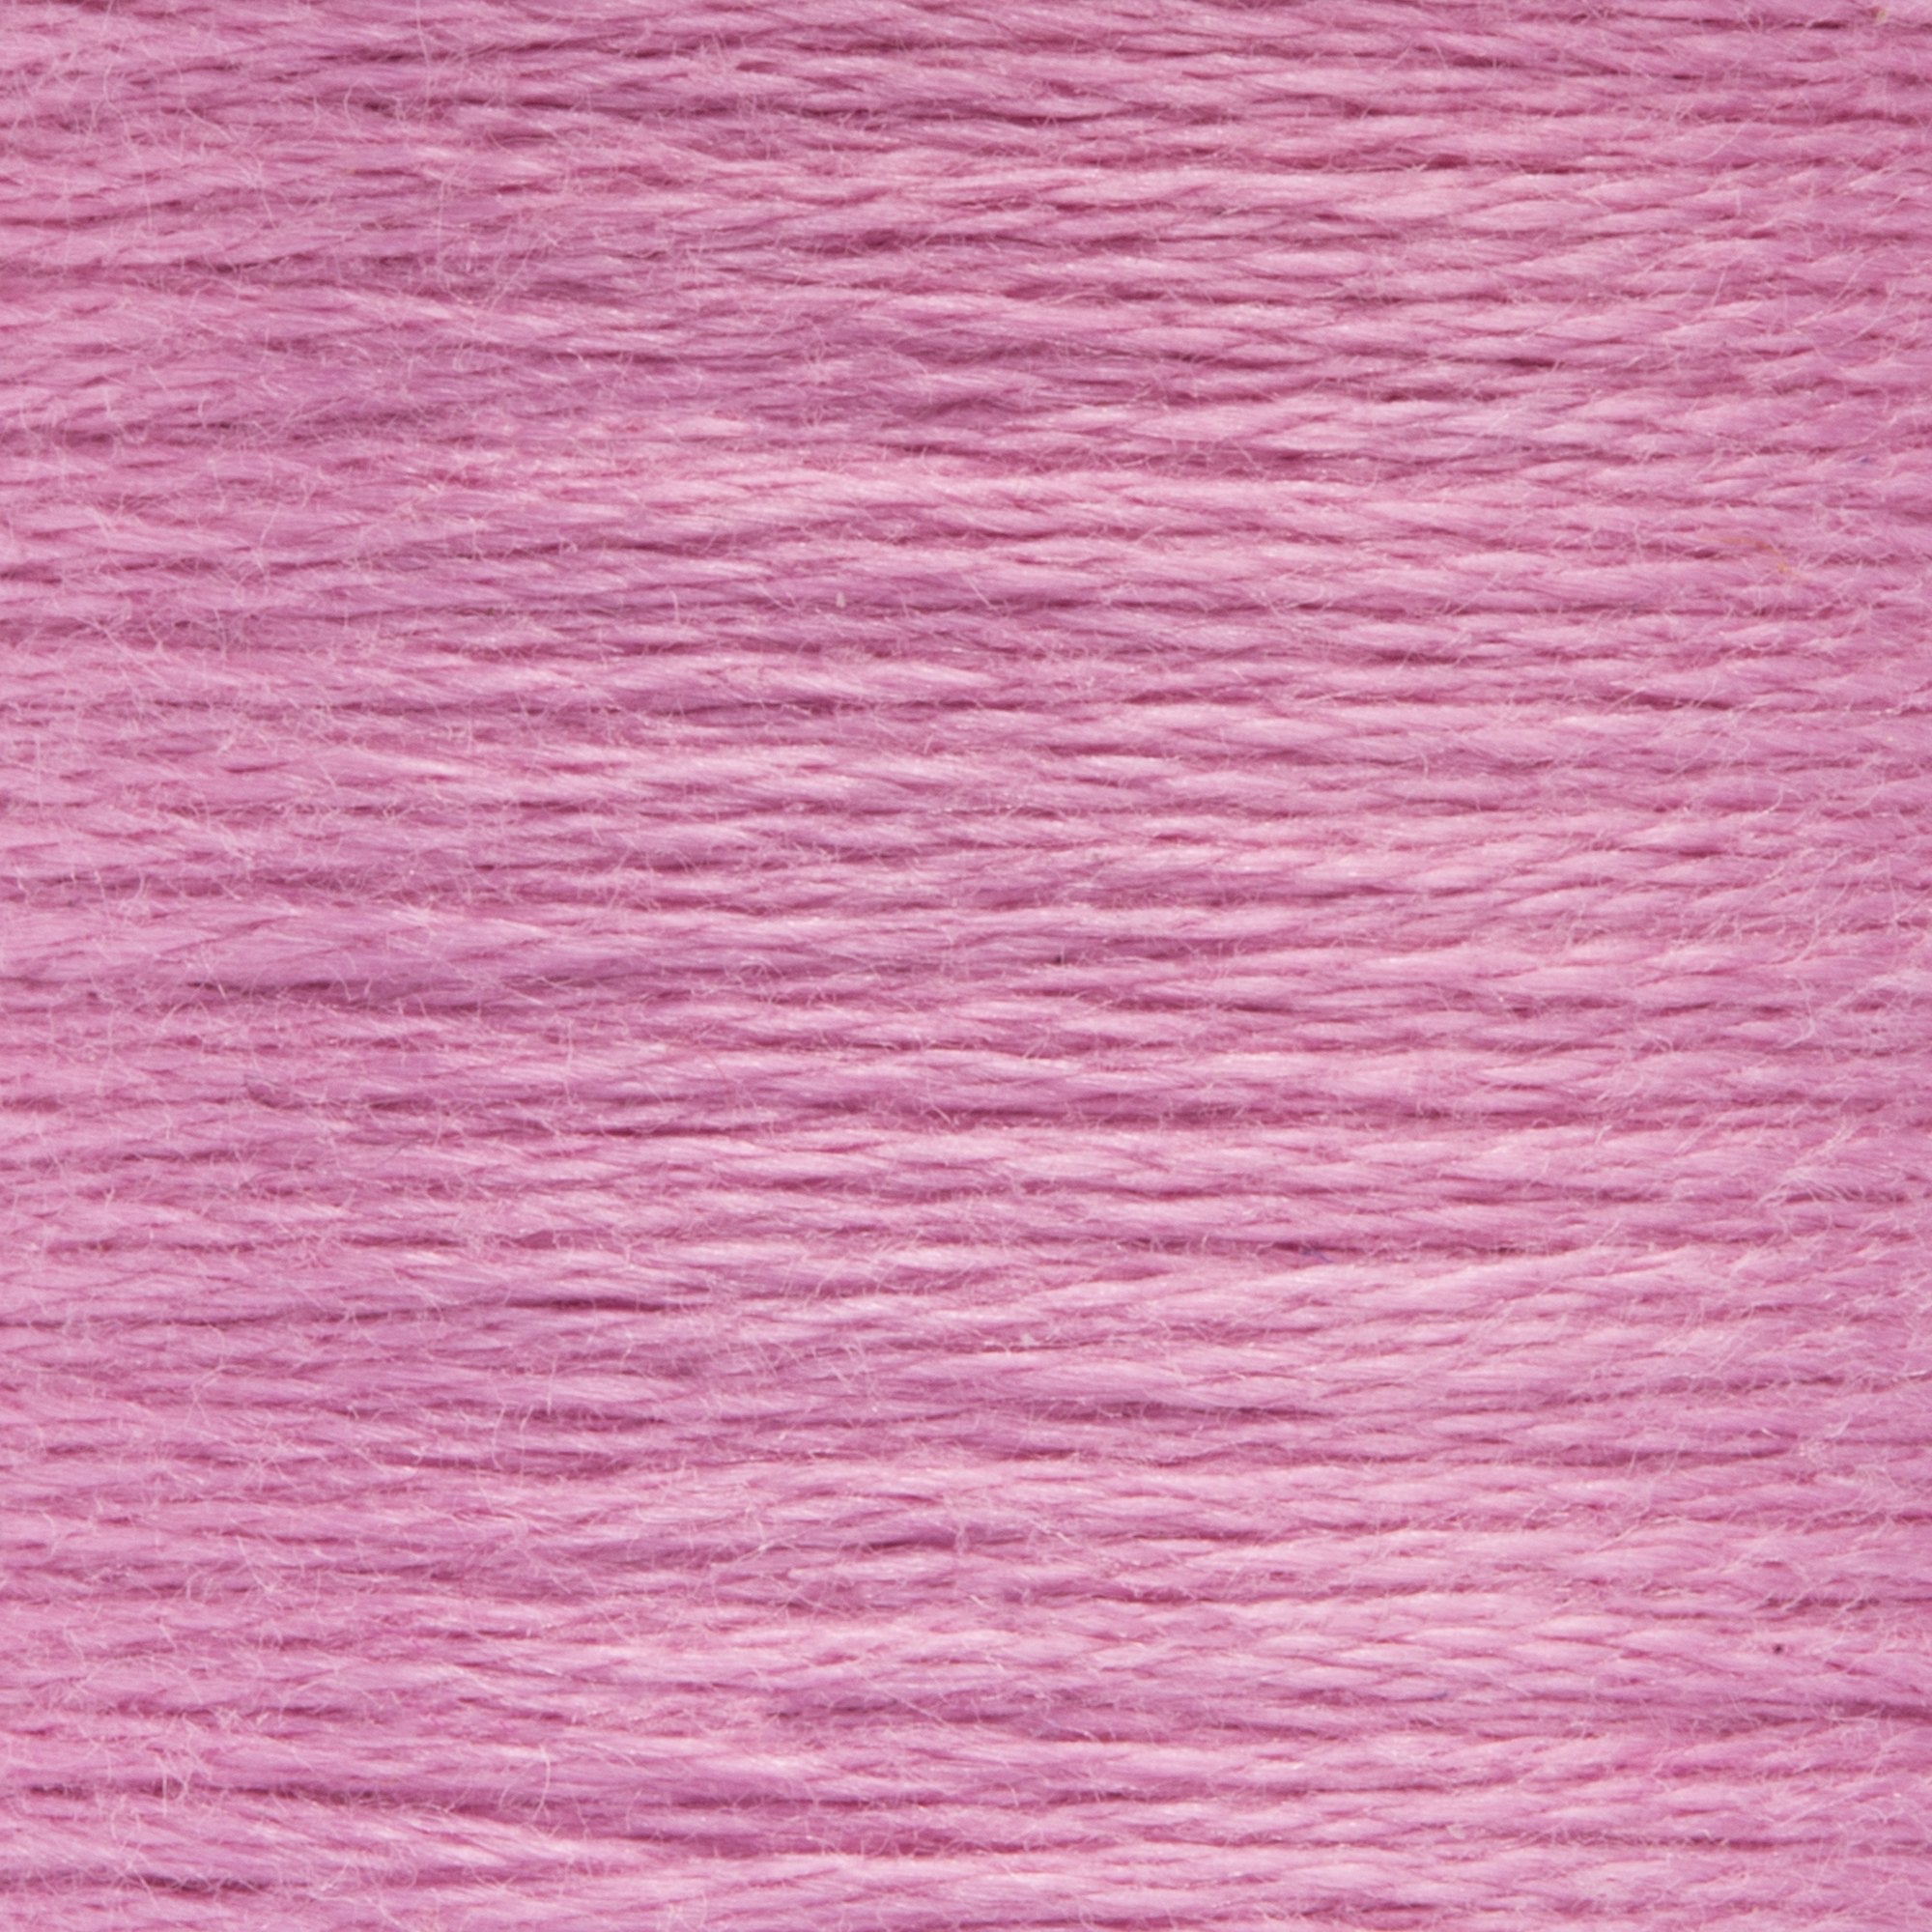 Anchor Embroidery Floss in Raspberry Lt